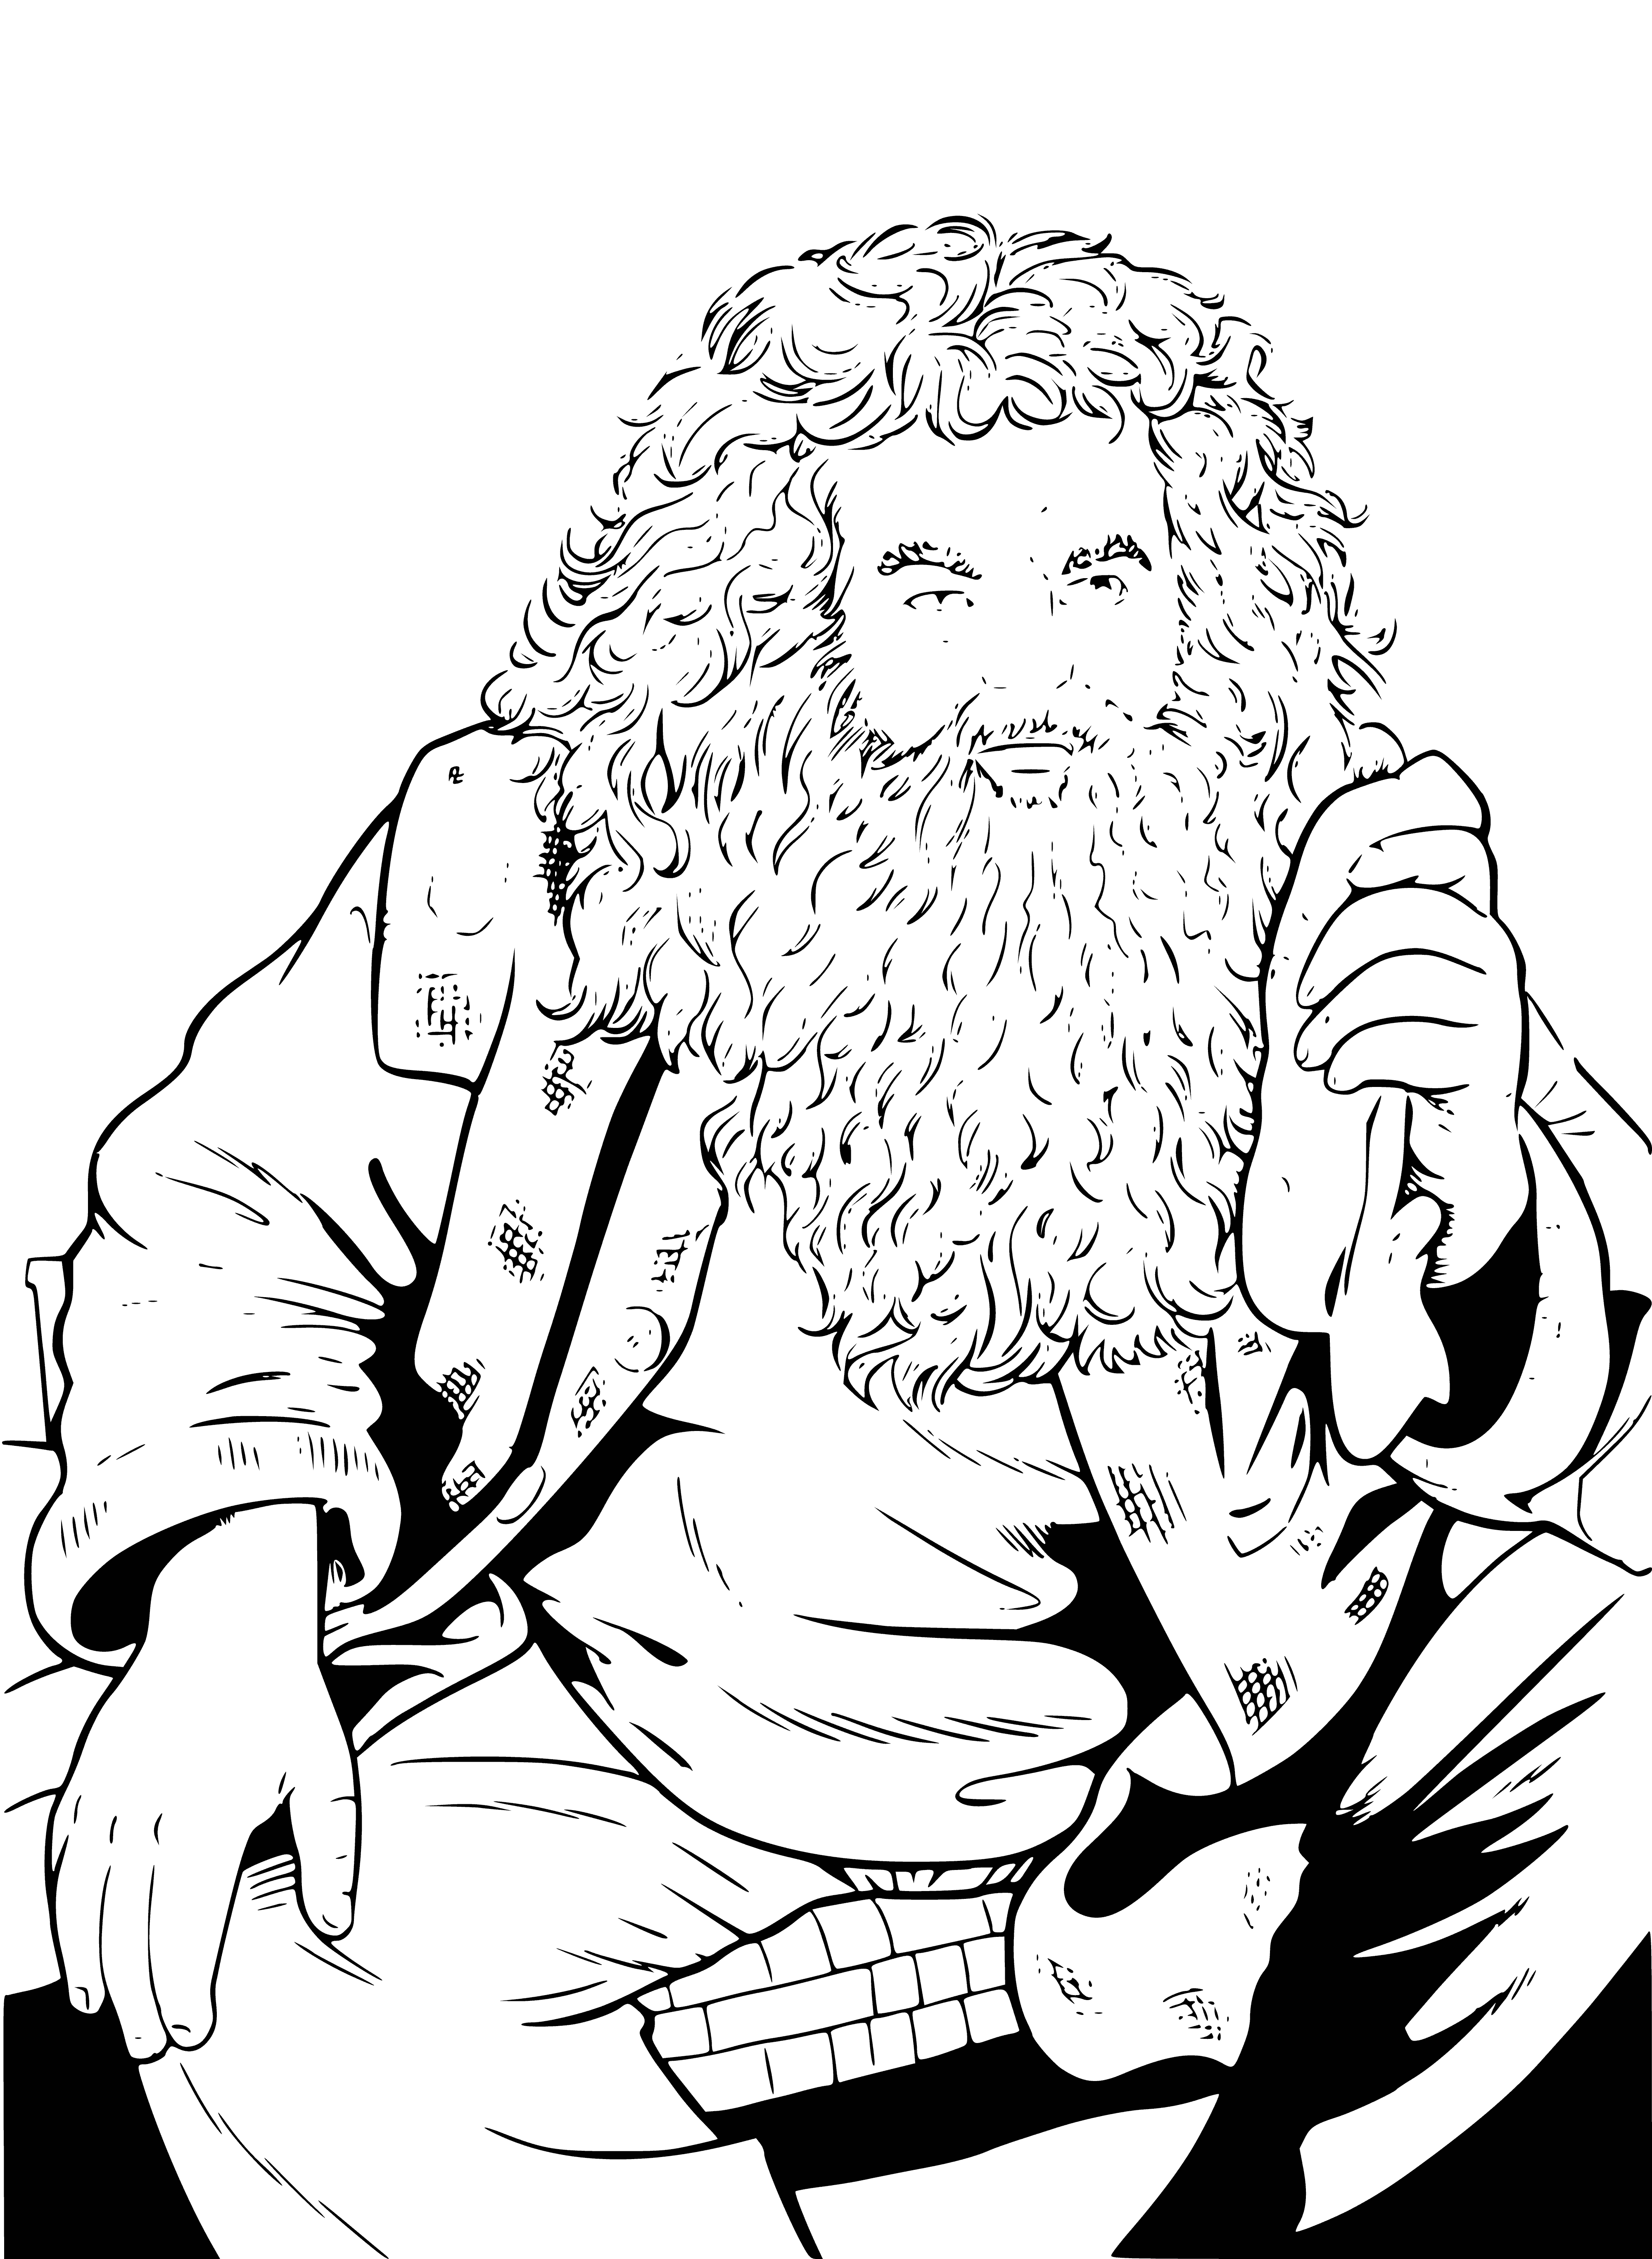 coloring page: Strong, hairy man with long black hair and beard wearing a long black coat. A man not to be messed with. #coloringpage